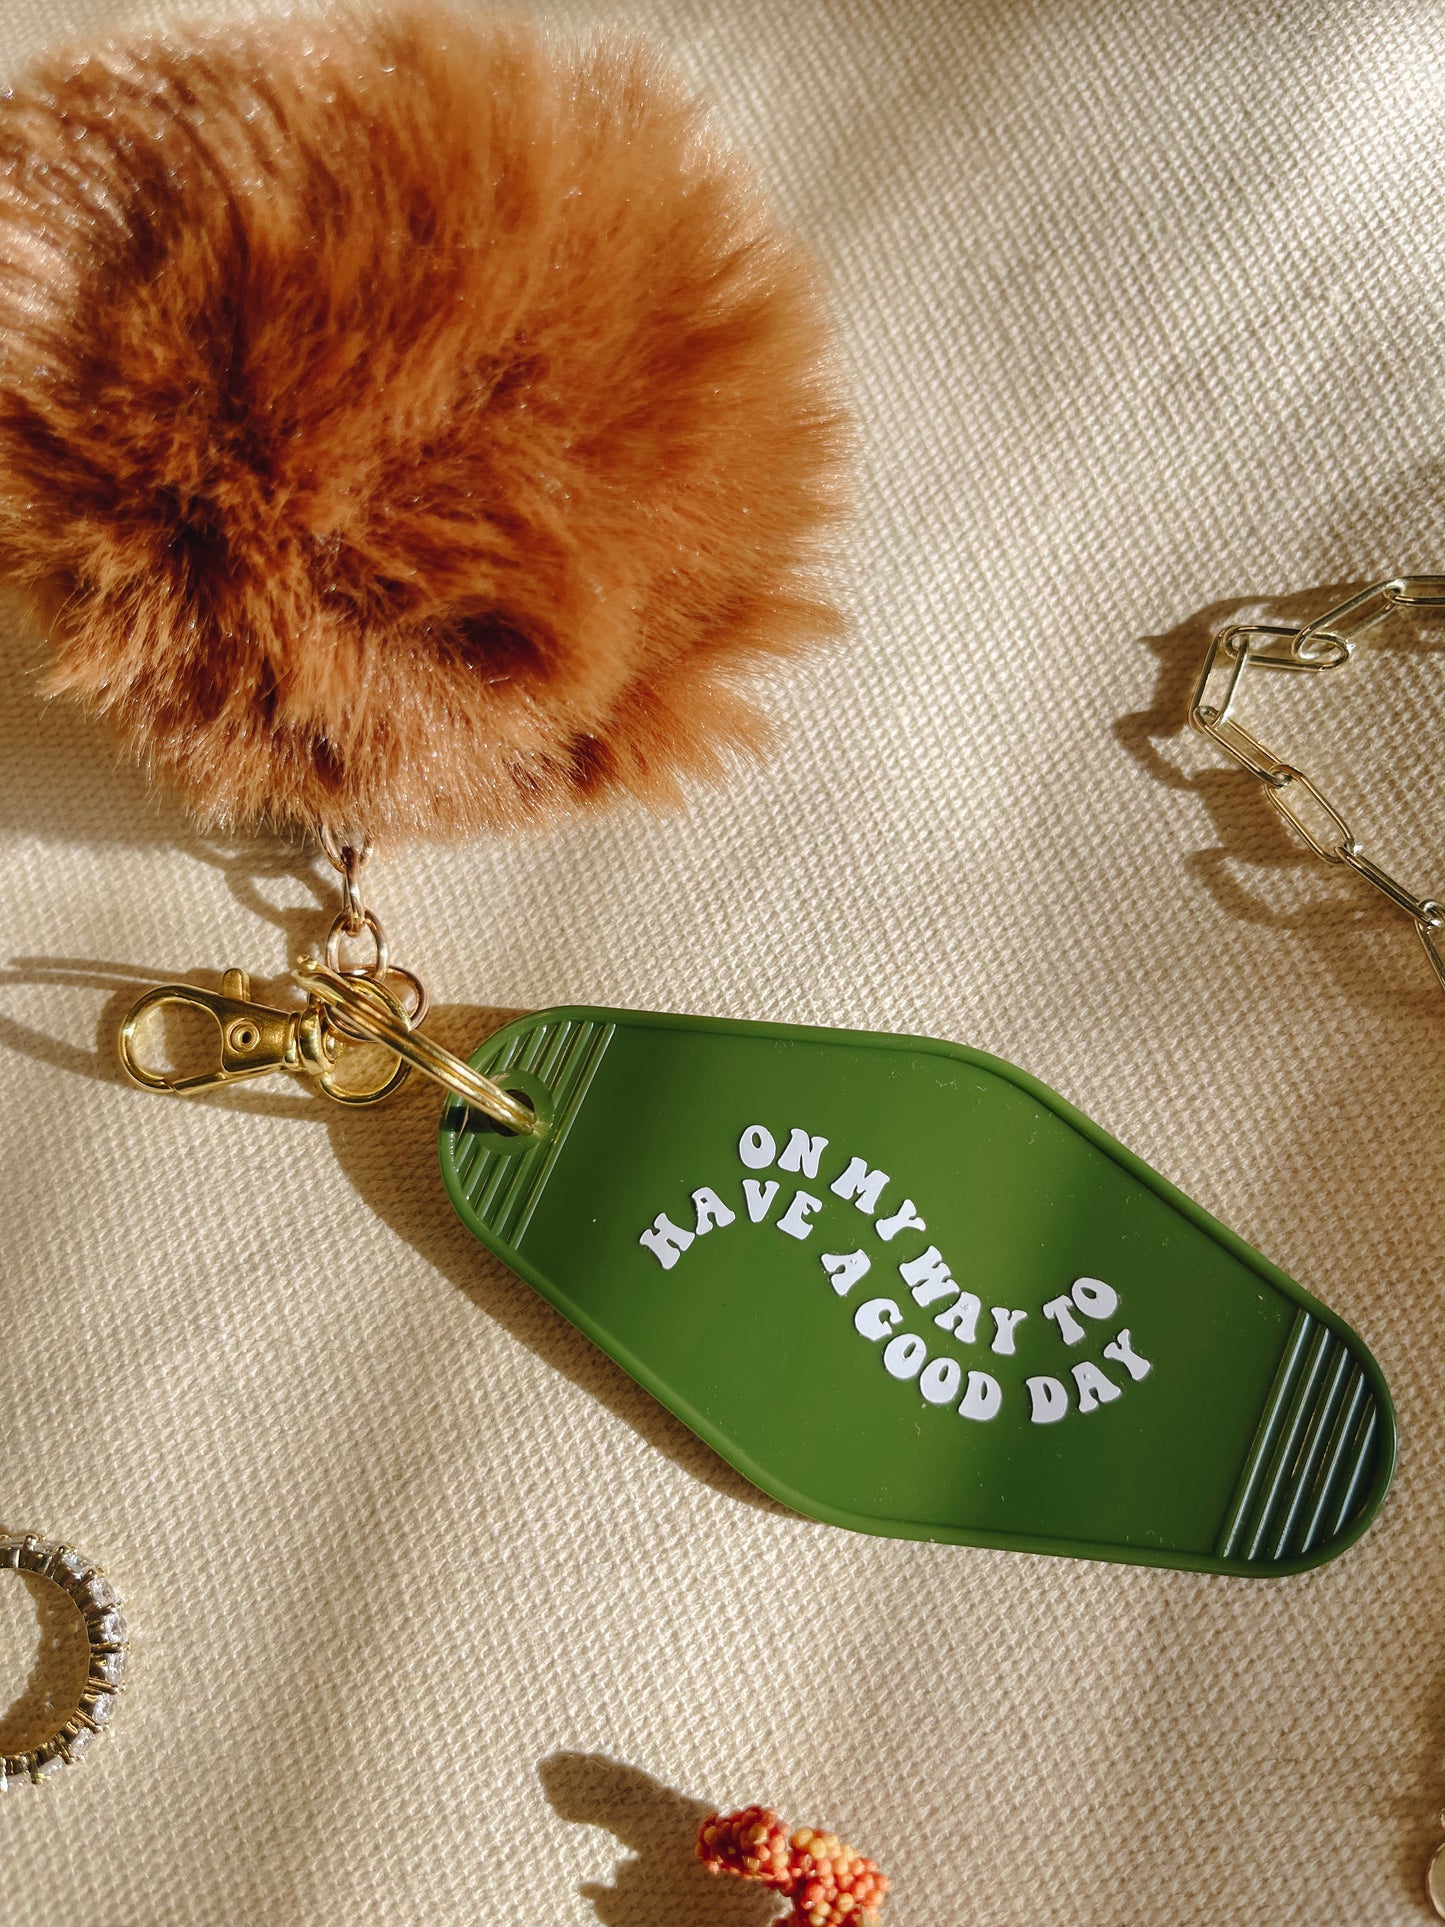 Vintage Motel Style Keychain - ON MY WAY TO HAVE A GOOD DAY